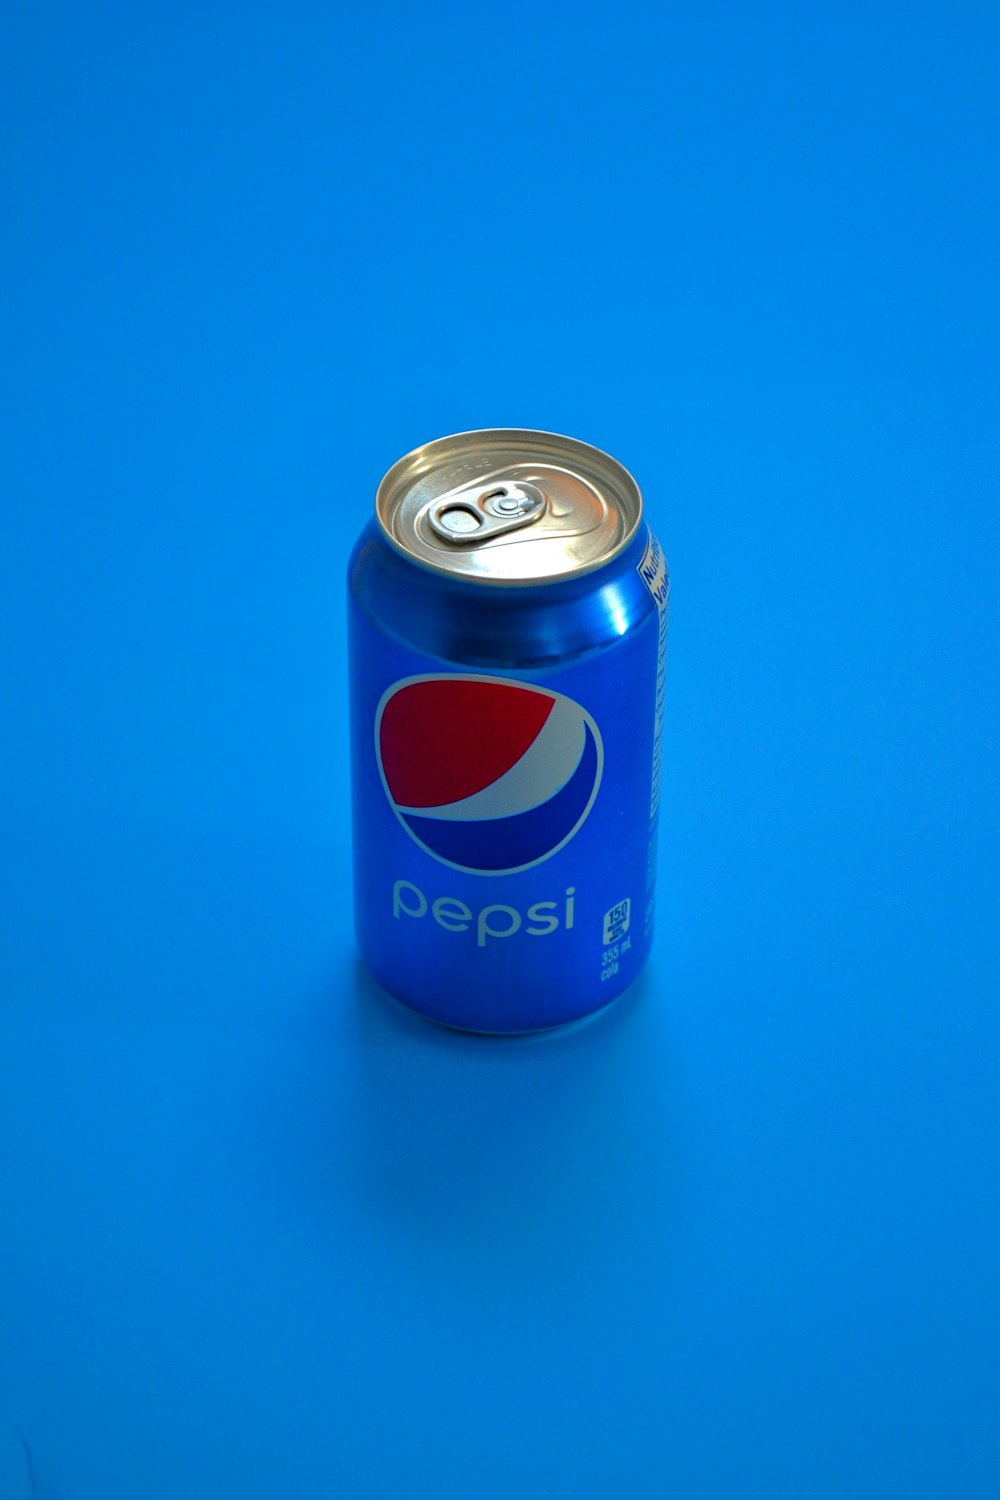 pepsi can on blue surface